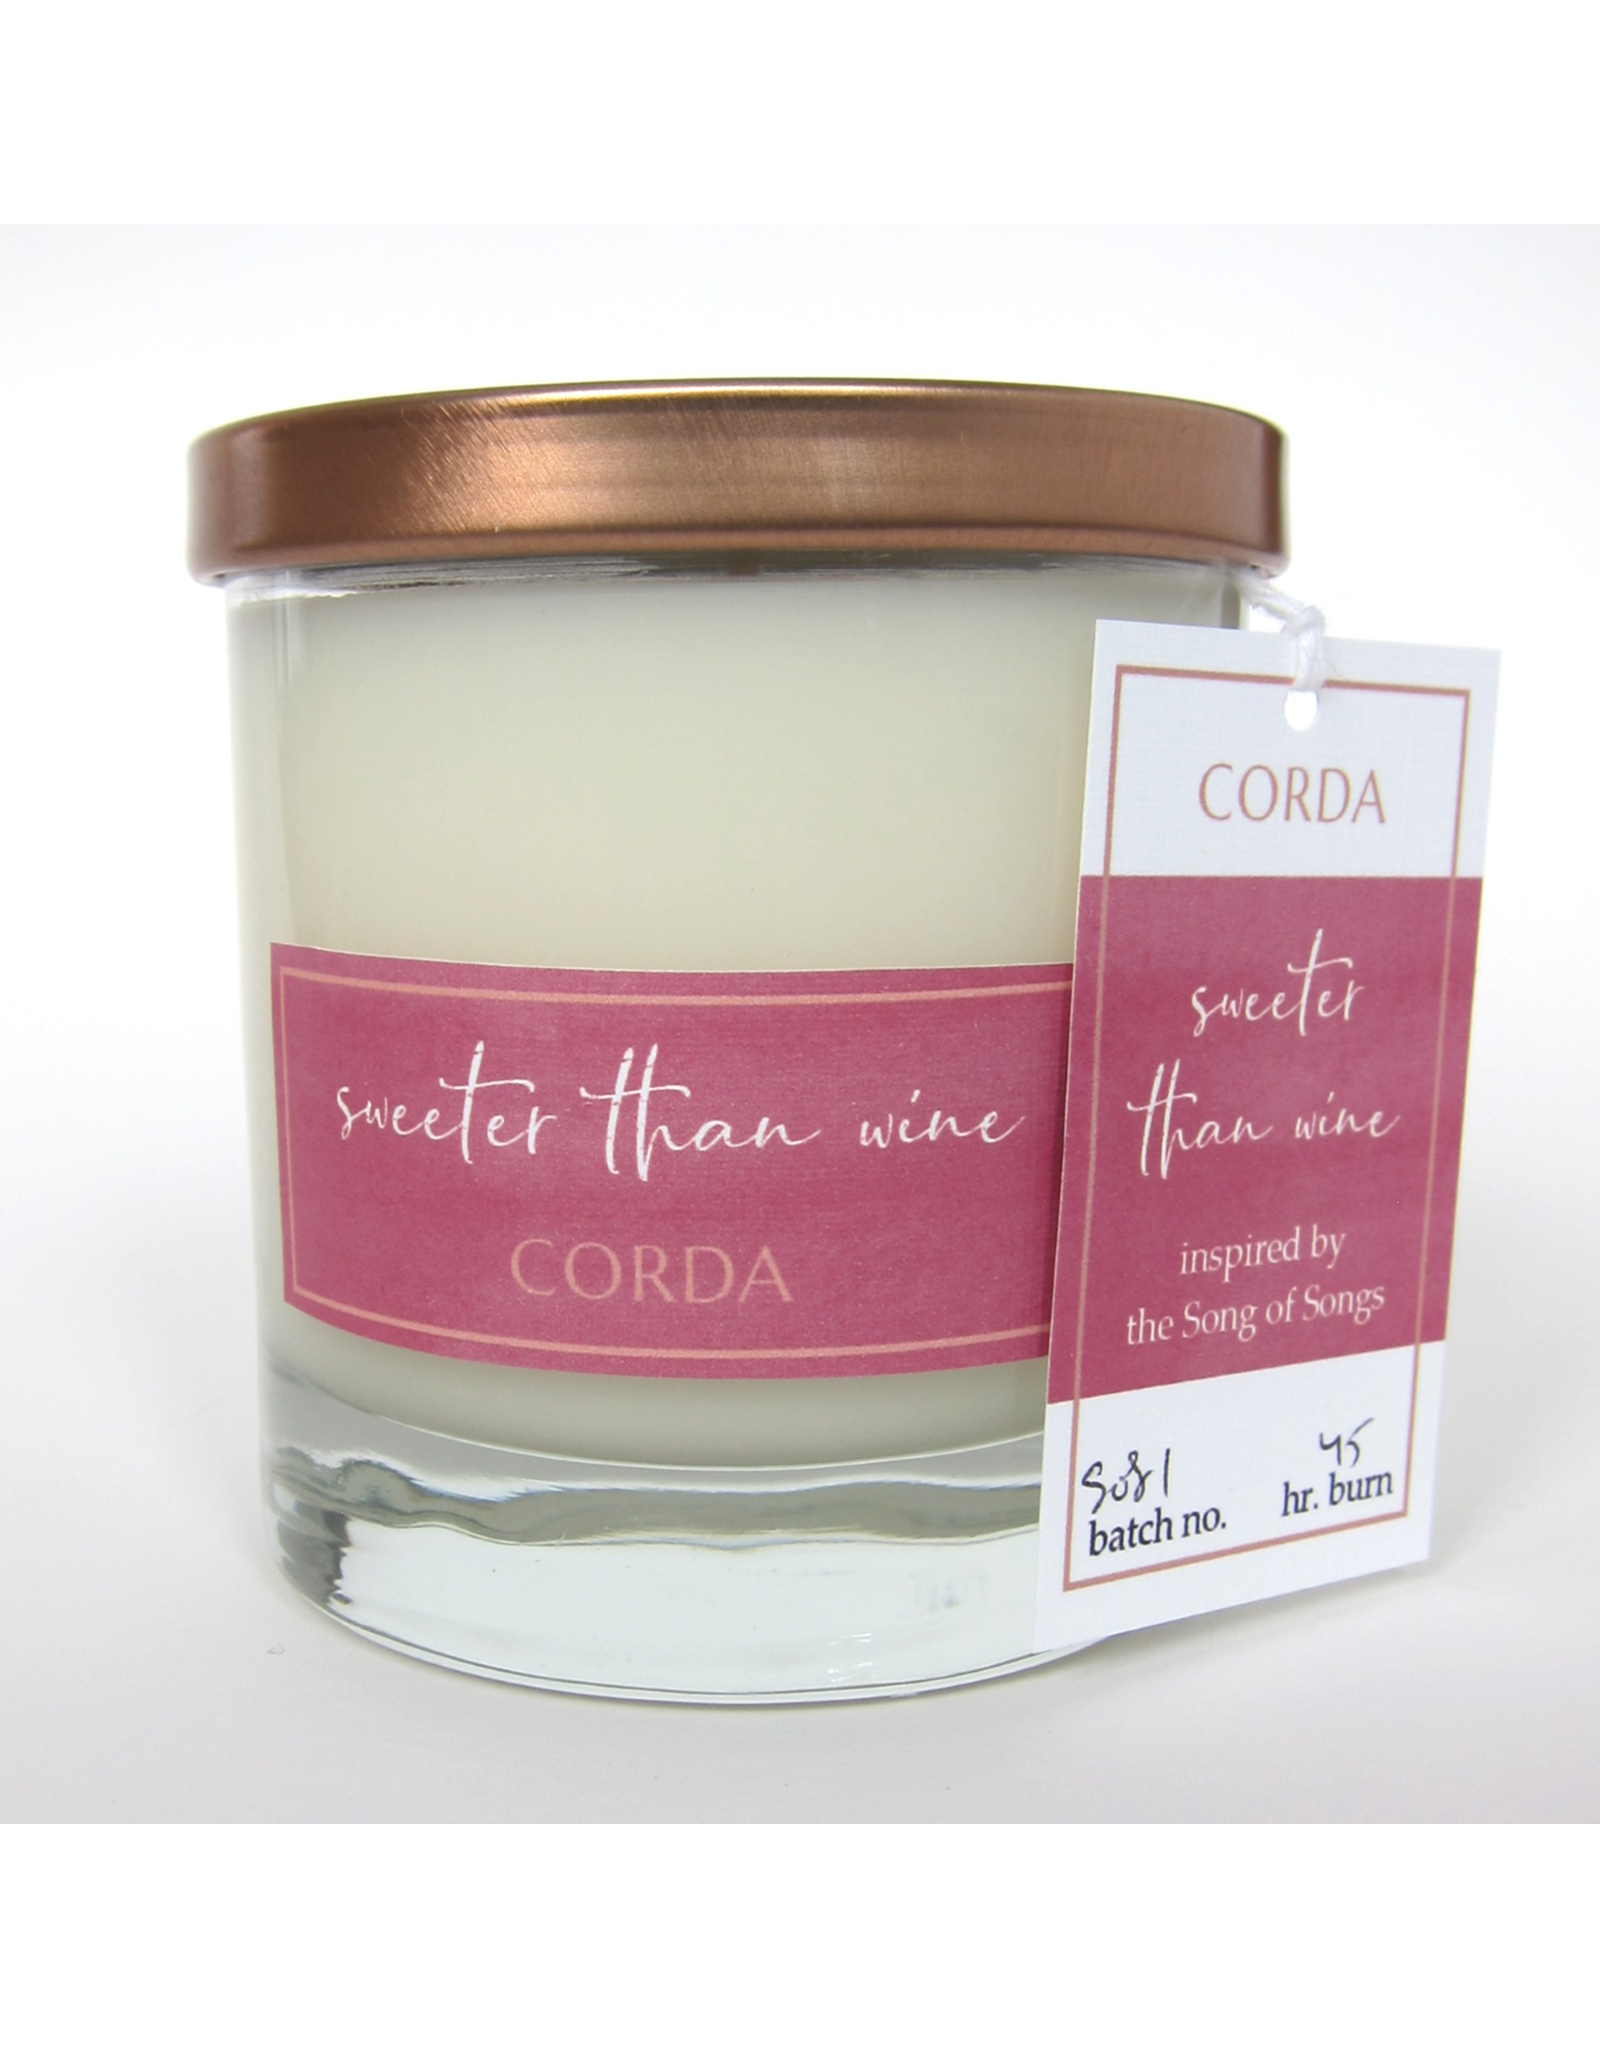 Corda Sweeter than Wine | Song of Songs - Cedar + Pomegranate + Apple